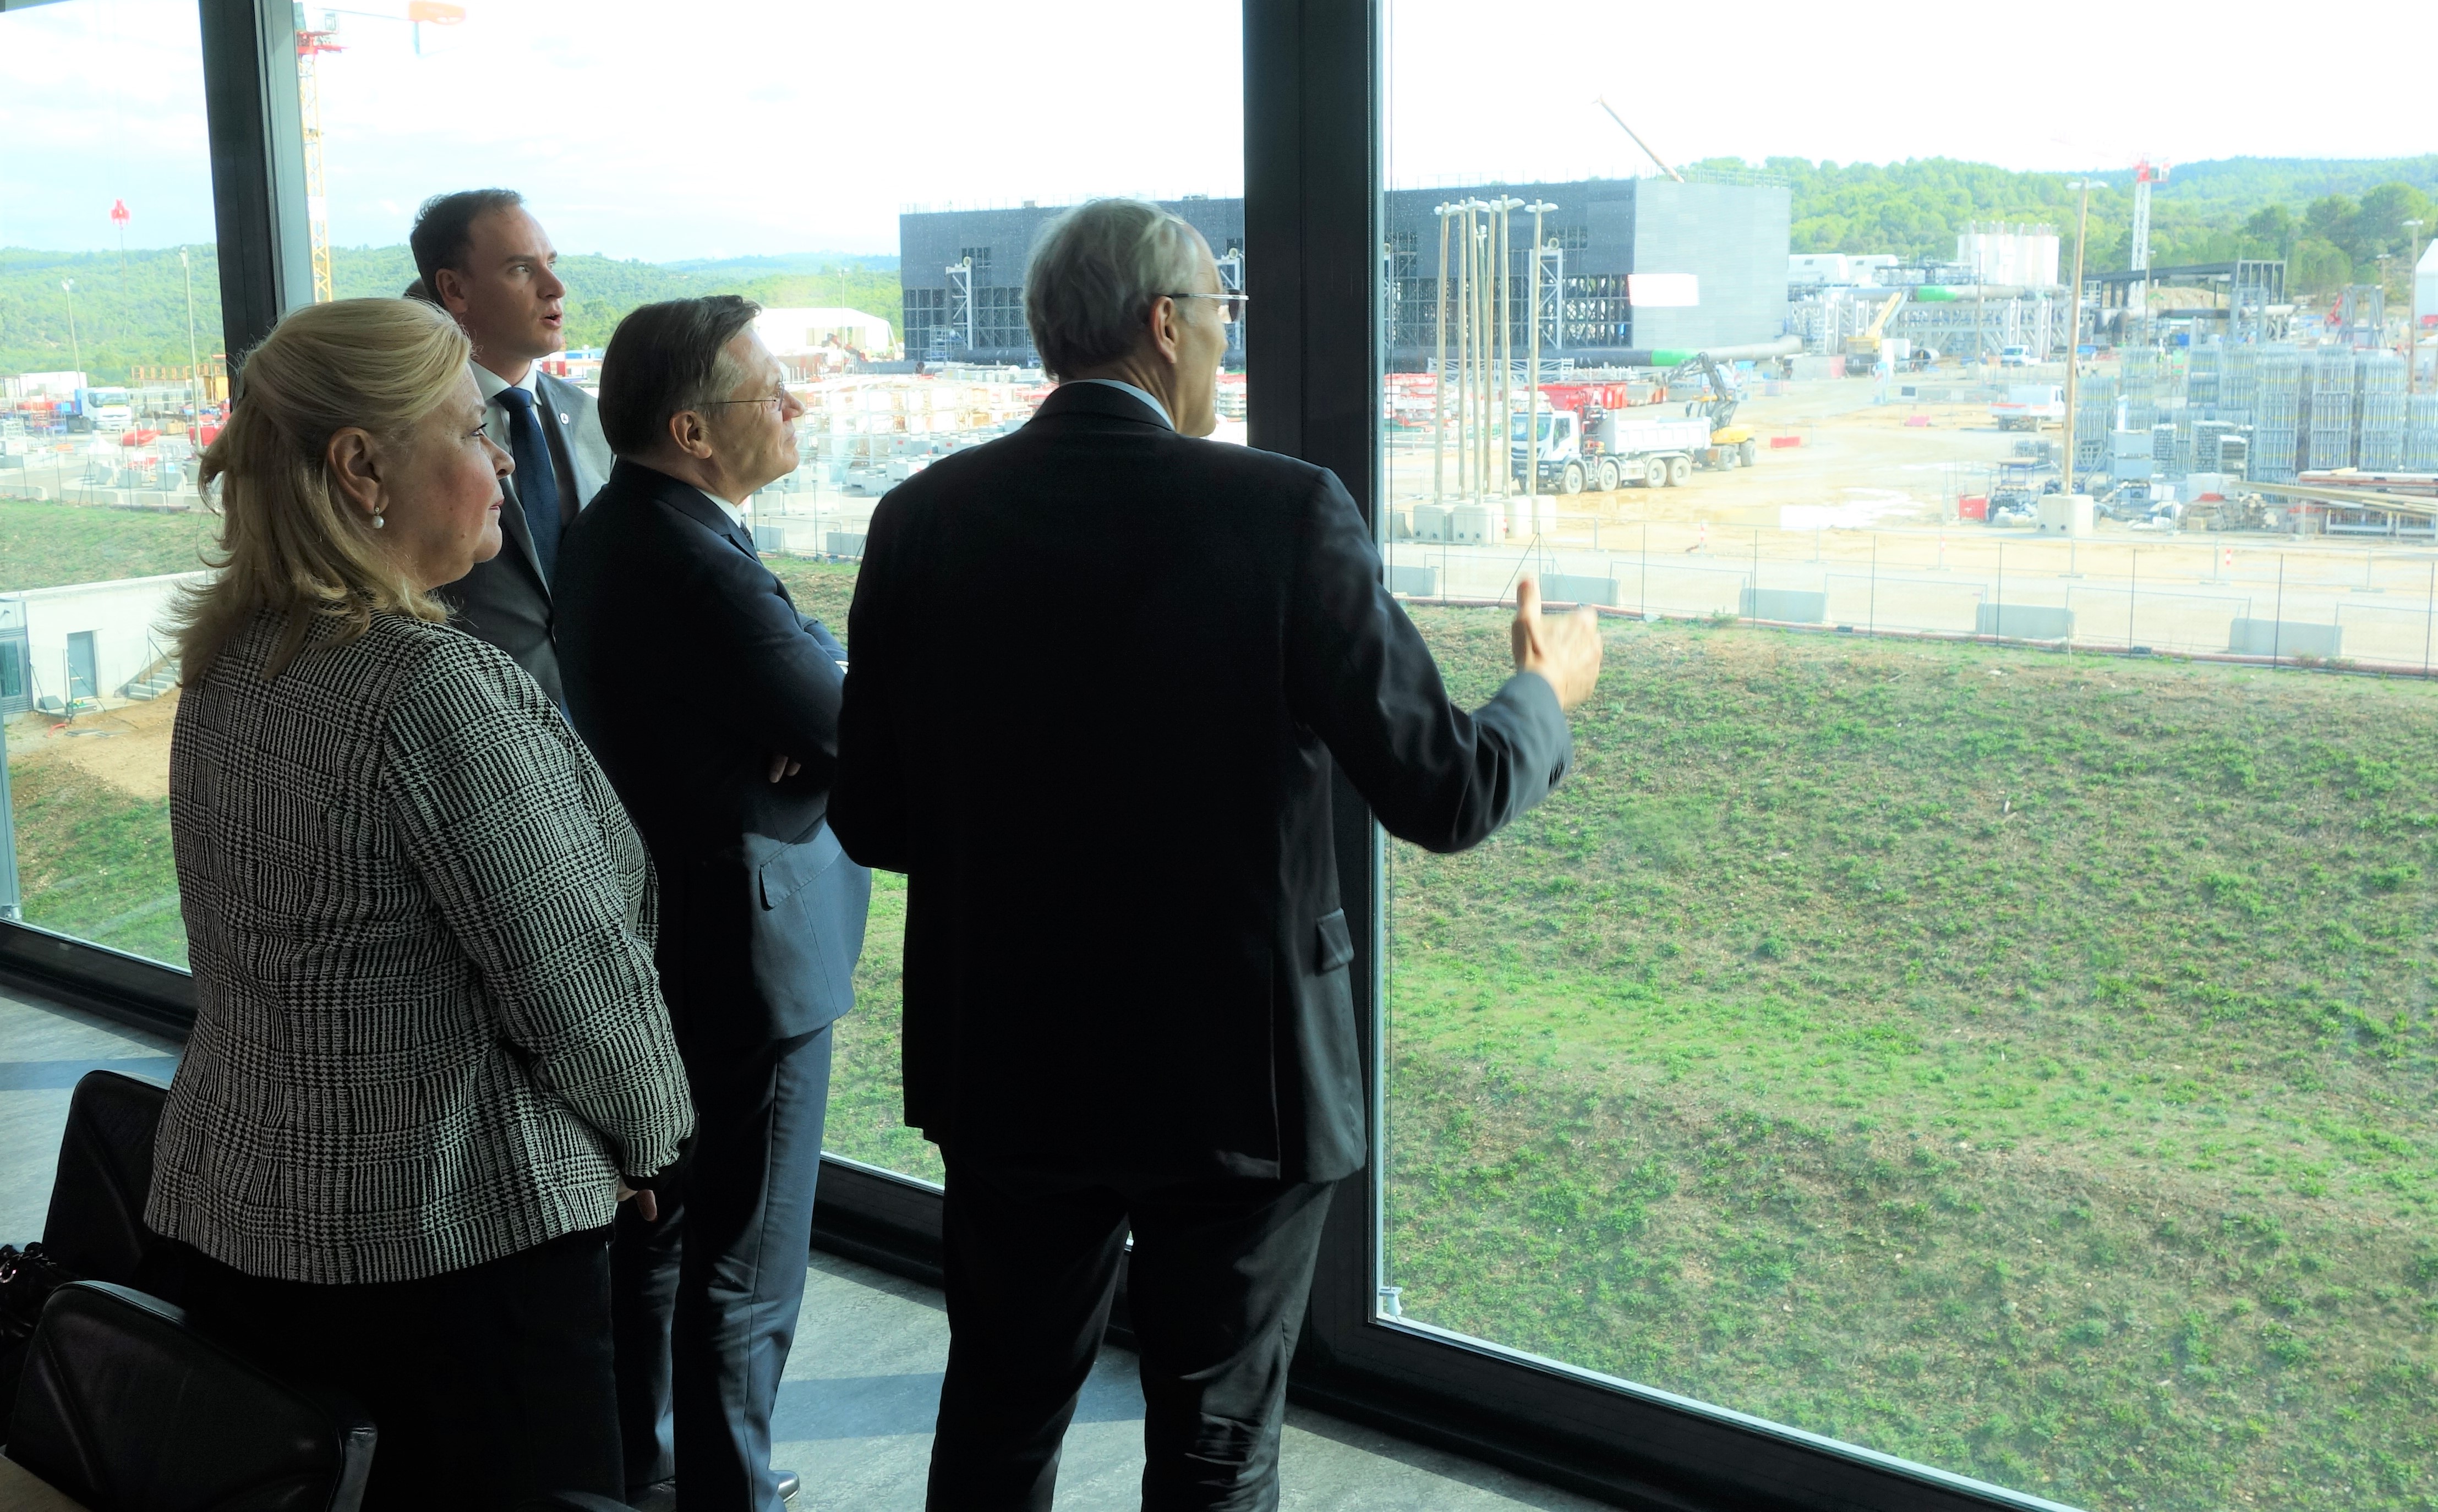 DIRECTOR GENERAL OF ROSATOM ALEXEY LIKHACHEV HAS VISITED THE ITER CONSTRUCTION SITE 